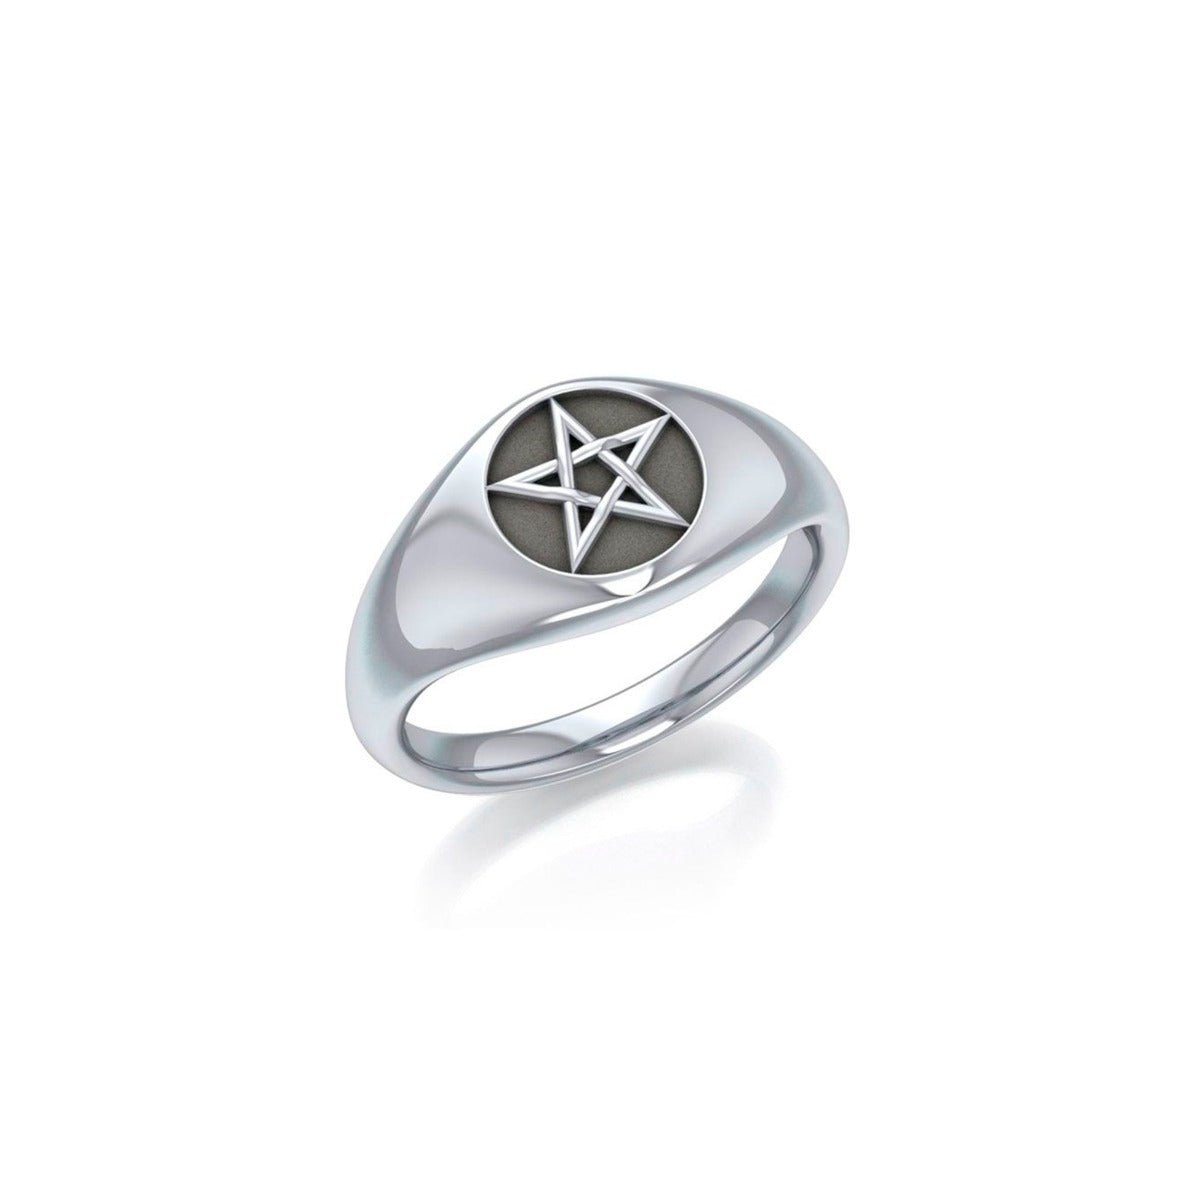 Pentacle Ring - 13 Moons